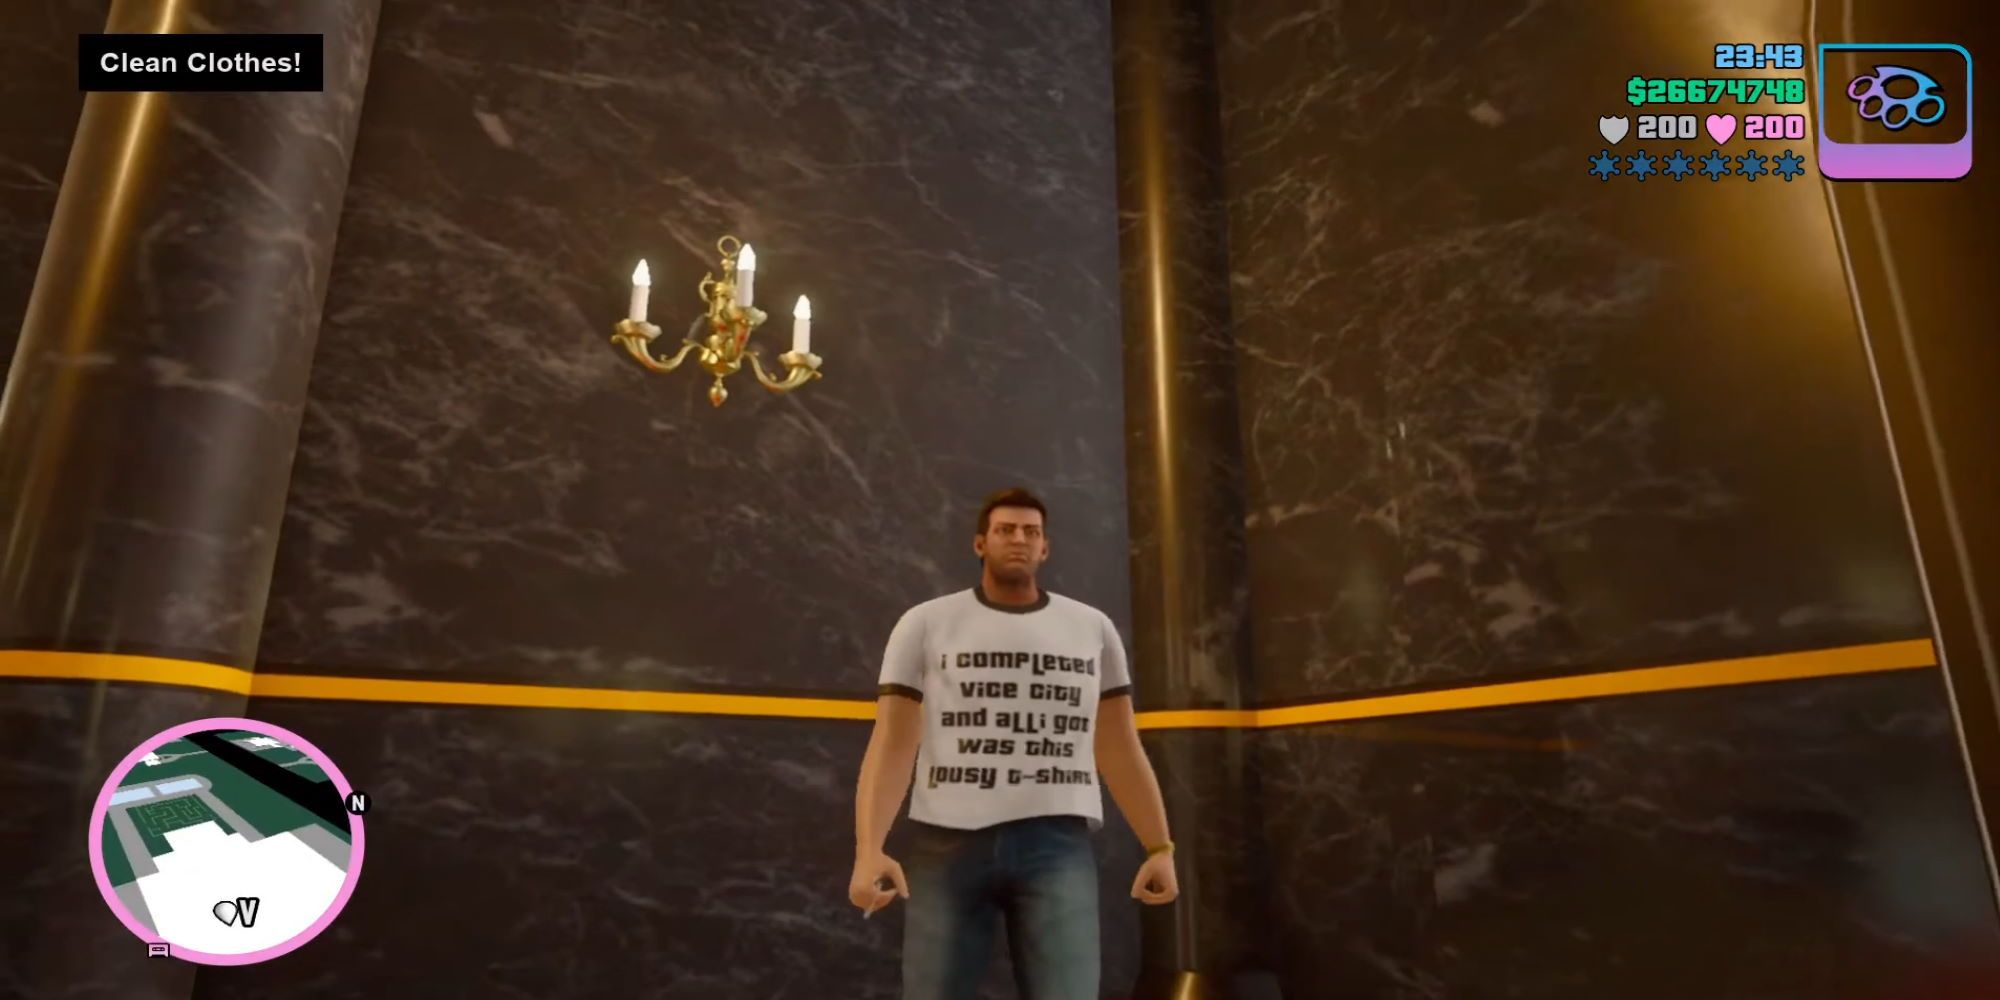 Tommy Vercetti wearing a shirt that says "I COMPLETED VICE CITY AND ALL I GOT WAS THIS LOUSY T-SHIRT"